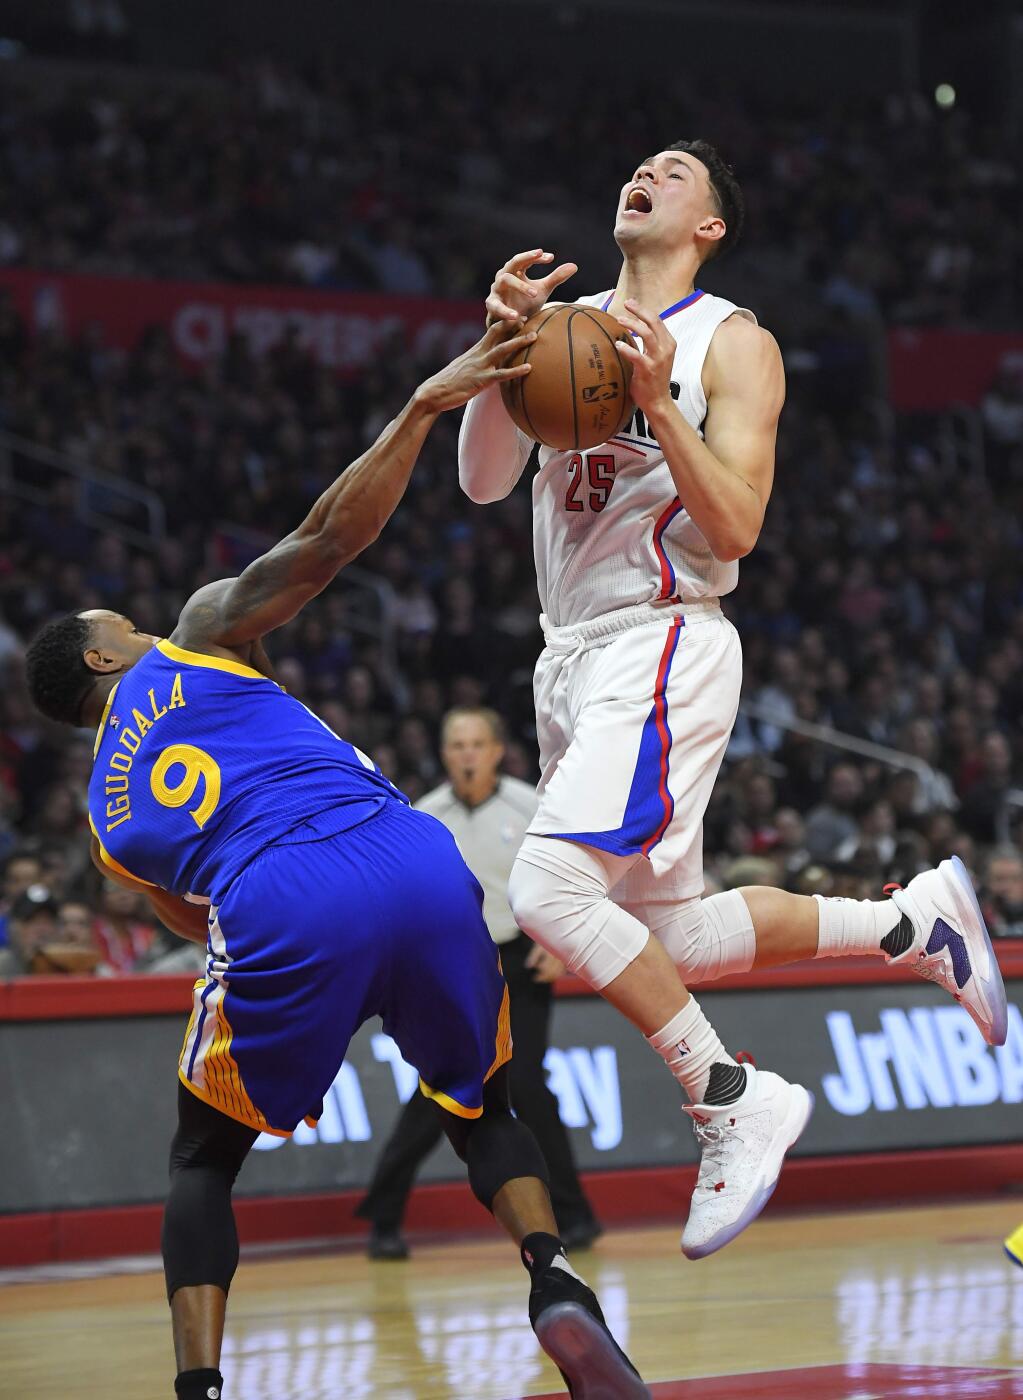 Golden State Warriors forward Andre Iguodala, left, blocks the shot of Los Angeles Clippers guard Austin Rivers during the first half of an NBA basketball game, Wednesday, Dec. 7, 2016, in Los Angeles. (AP Photo/Mark J. Terrill)